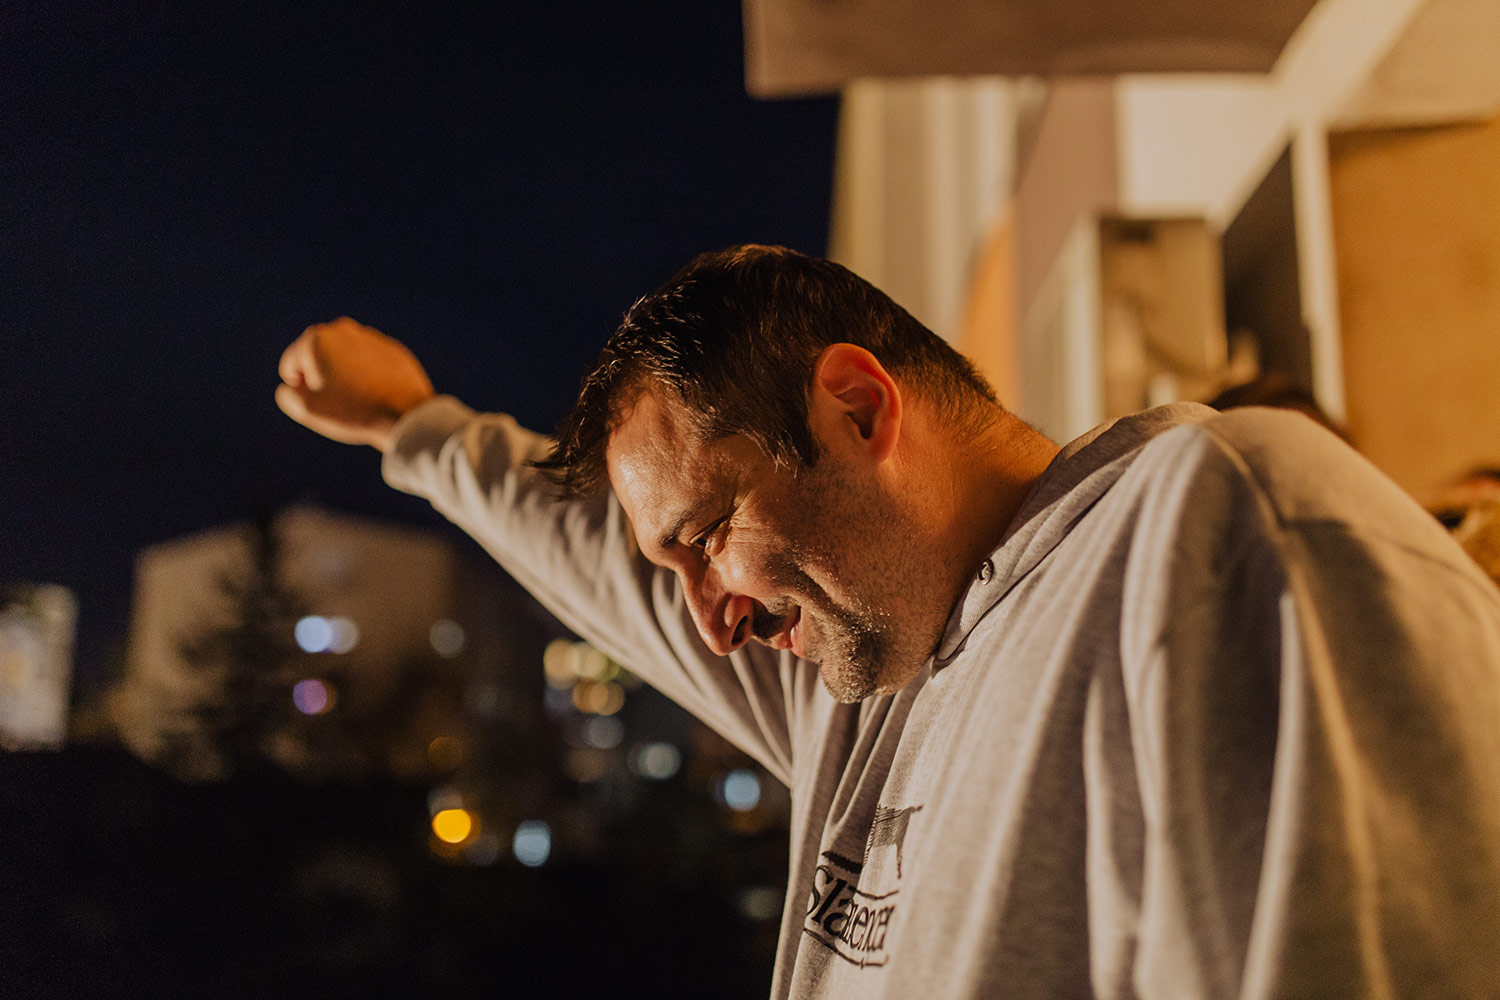 Whistleblower Aleksandar Obradović gestures to protesters demanding his release from a balcony of his home where he was held under house arrest. (Credit: Djordje Djokovic)